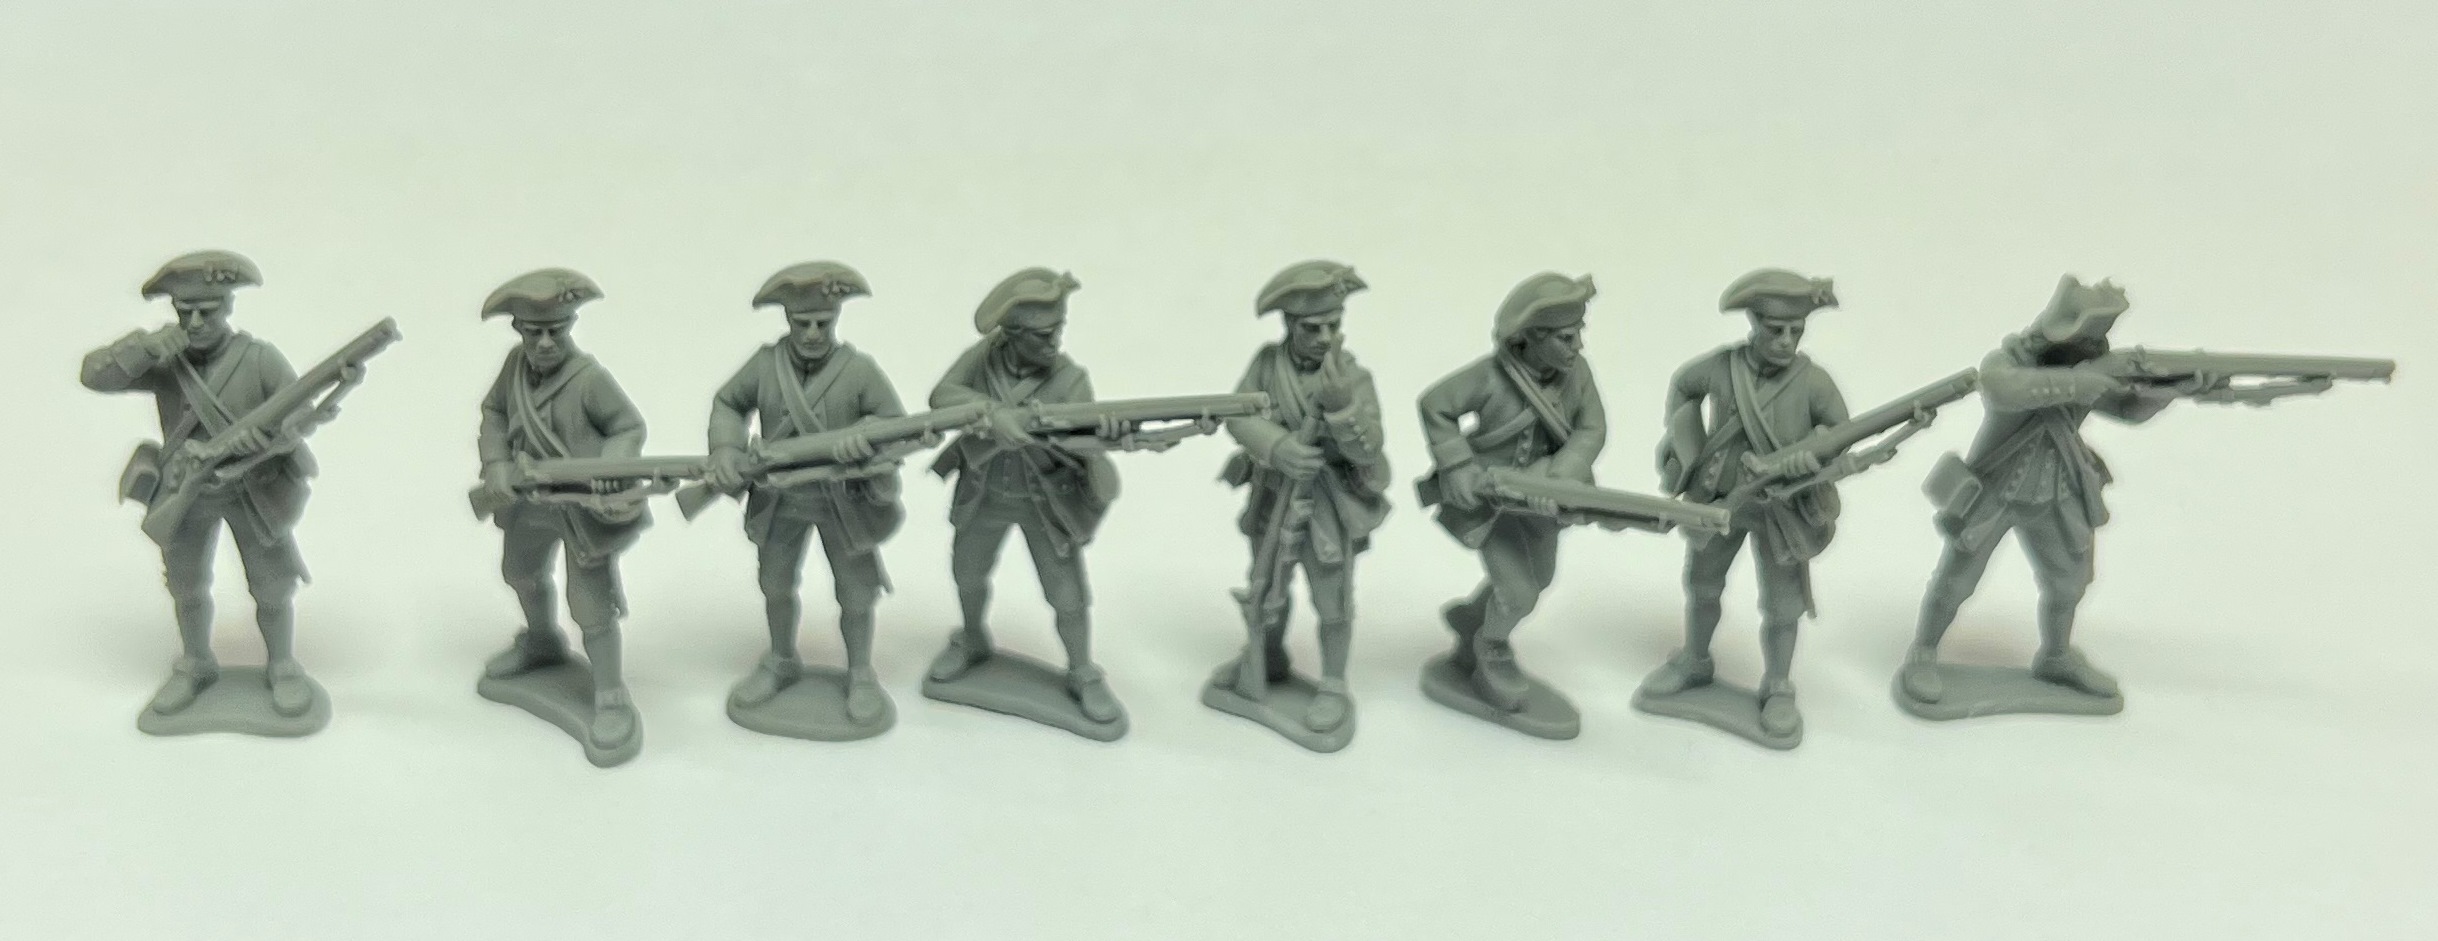 Colonial Infantrymen - North Star Military Figures